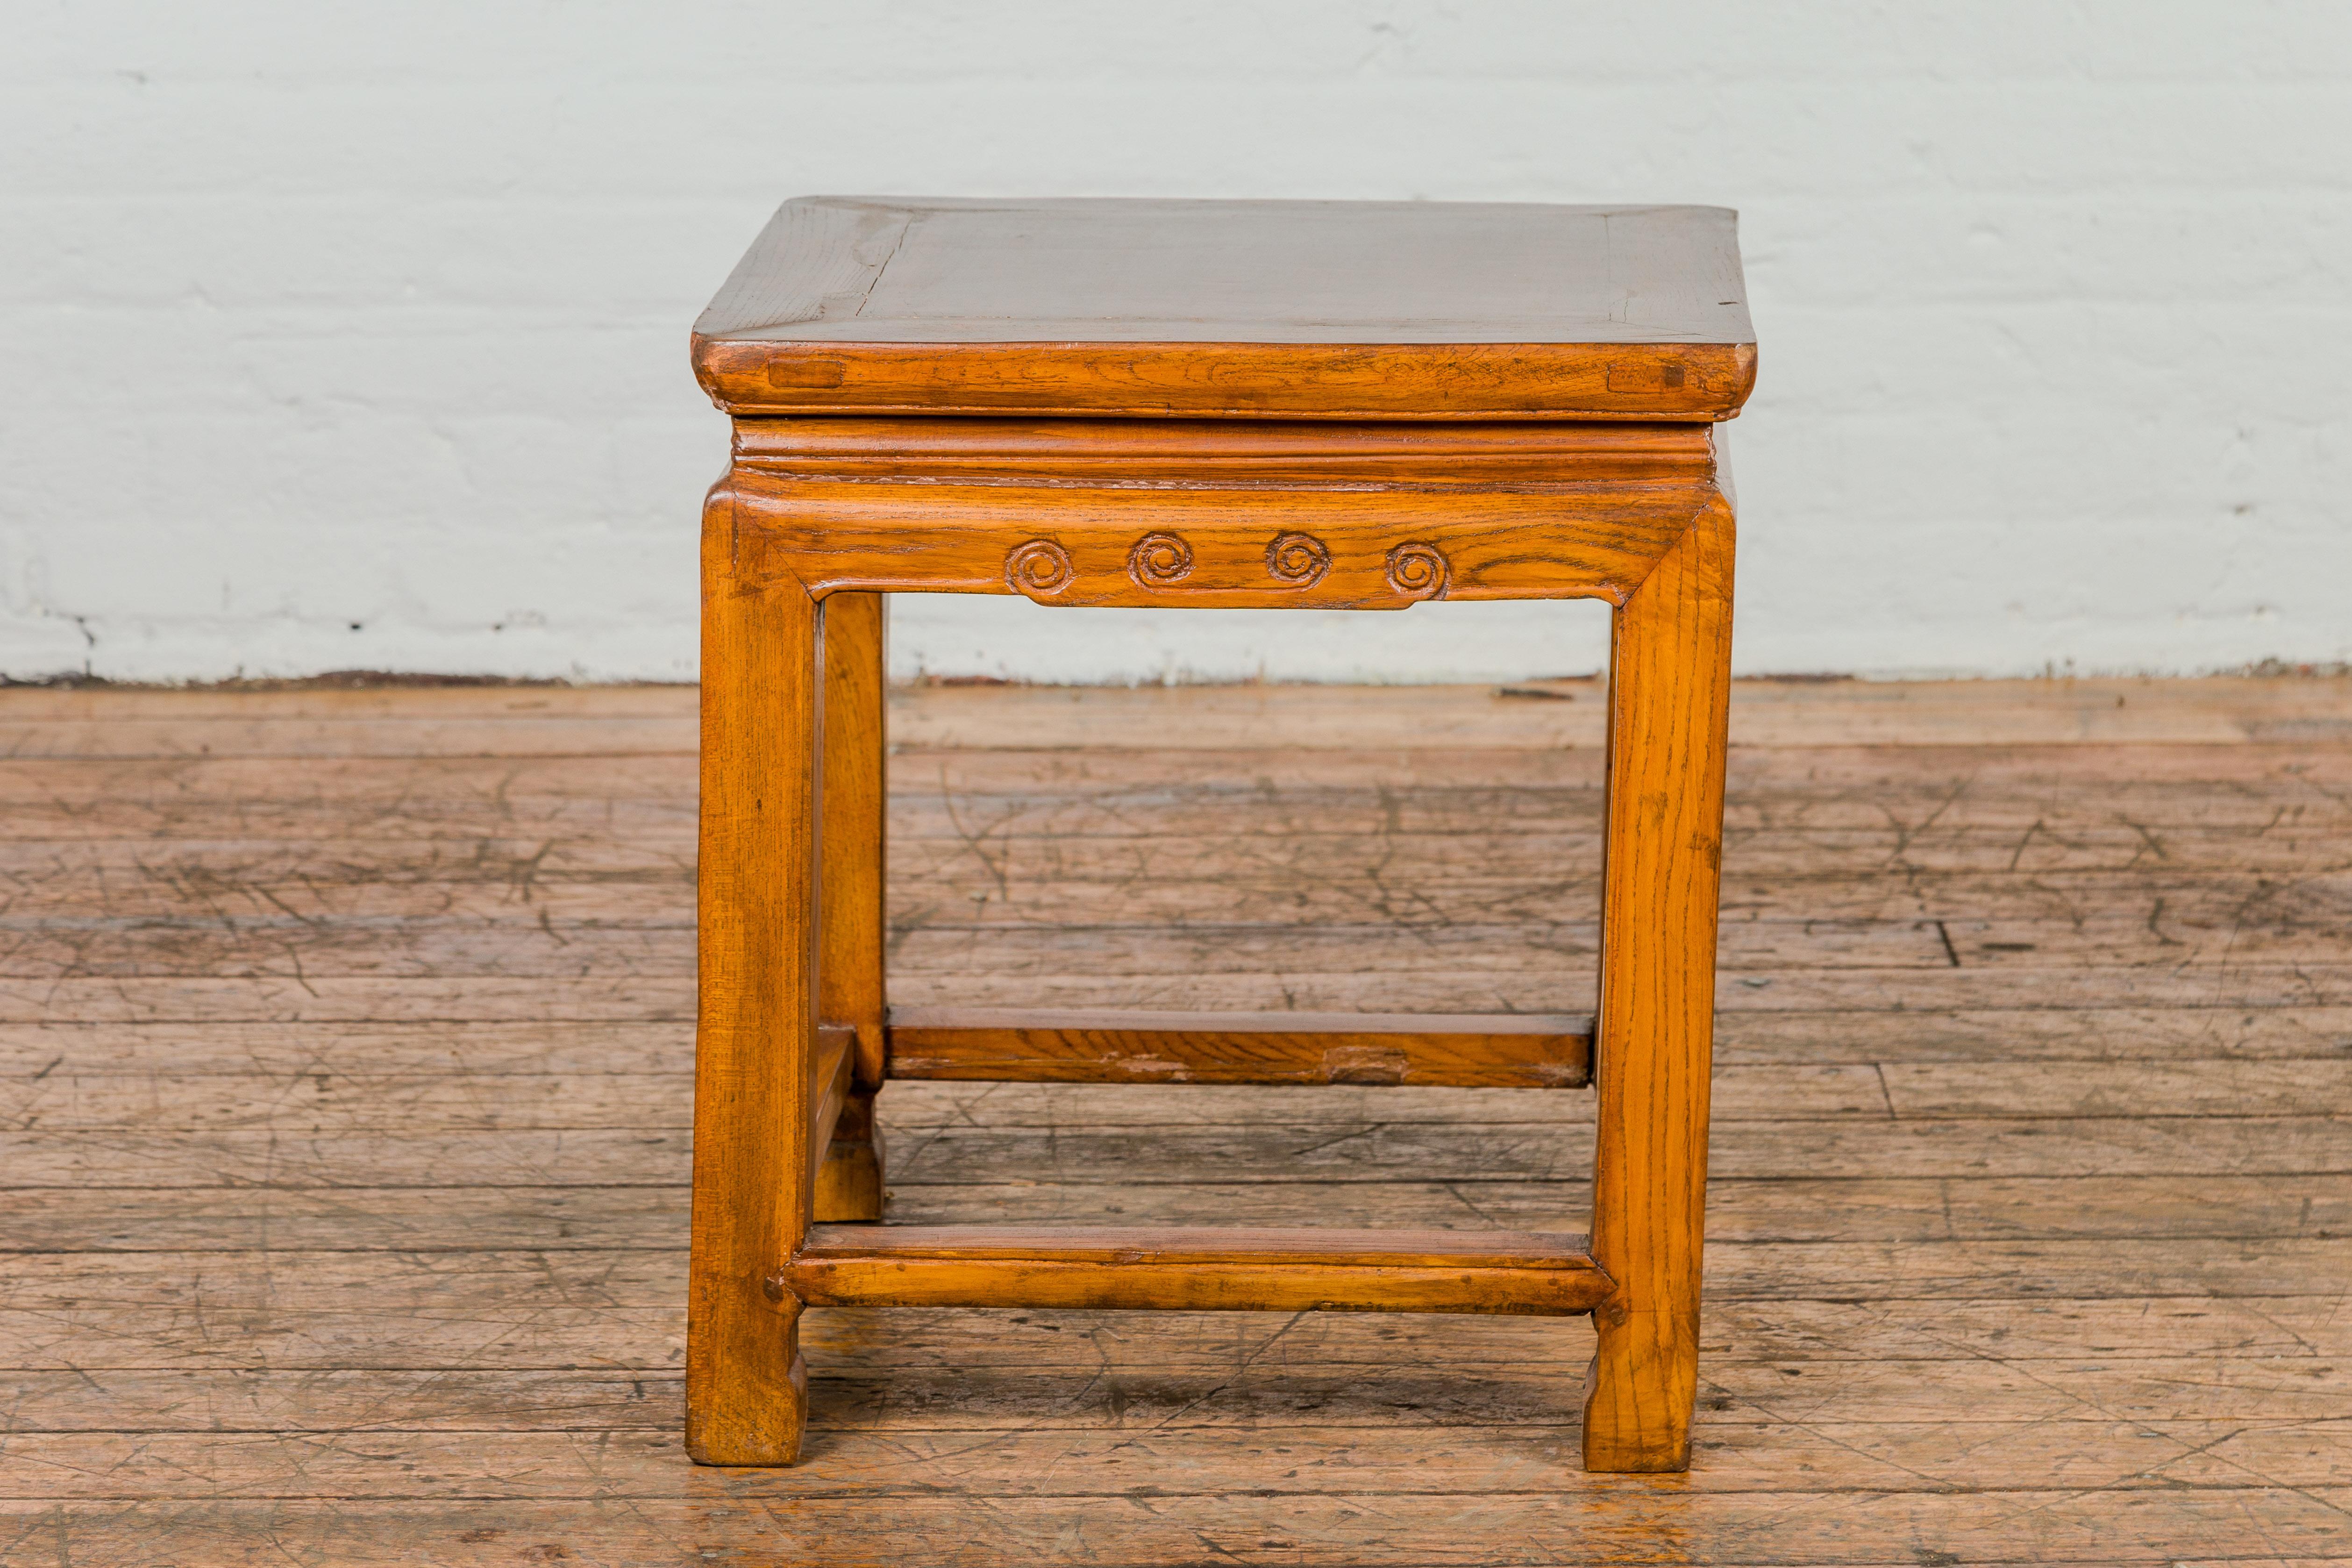 Chinese Elm Qing Dynasty Period Side Table with Horse Hoof Legs and Stretchers For Sale 8